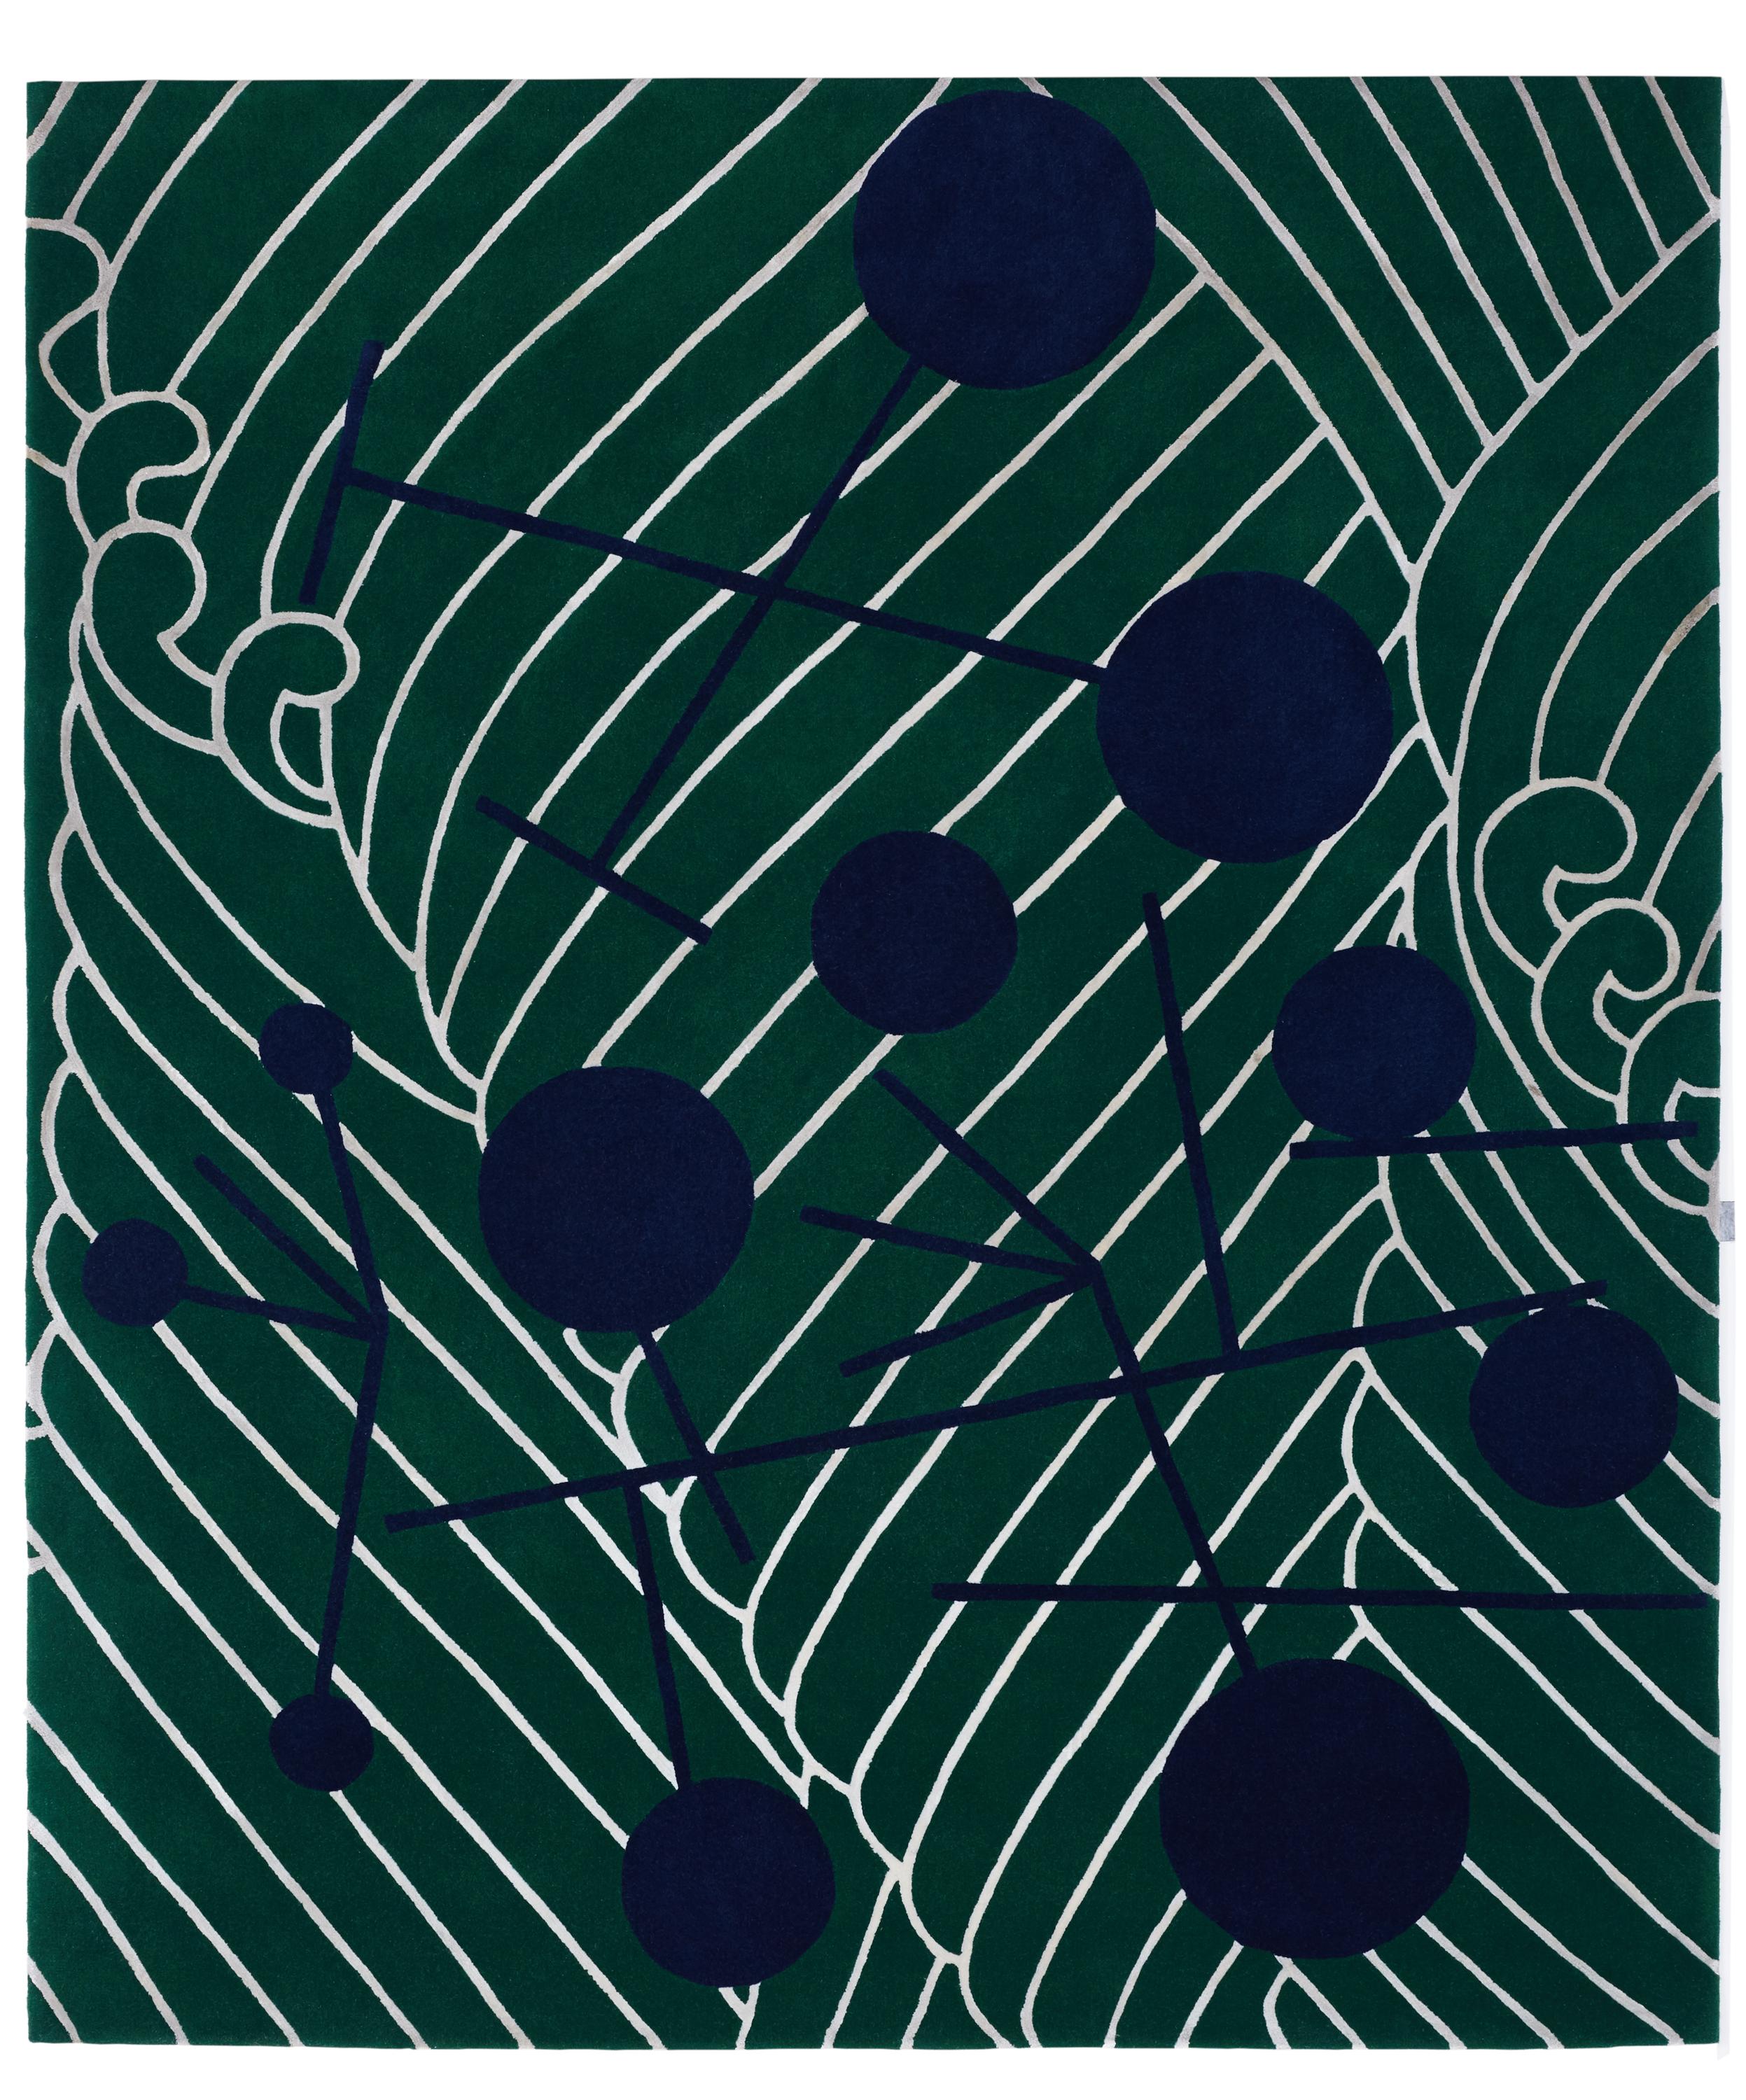 Abstract Dadaist contemporary rug inspired by Sophie Taeuber Arp.
Artist: Sophie Taeuber Arp
Dimensions: W 170, D 240 cm
New-Zealand wool and silk.

Japanese Abstractions is a collection of nine pieces, all designed around the concept of the